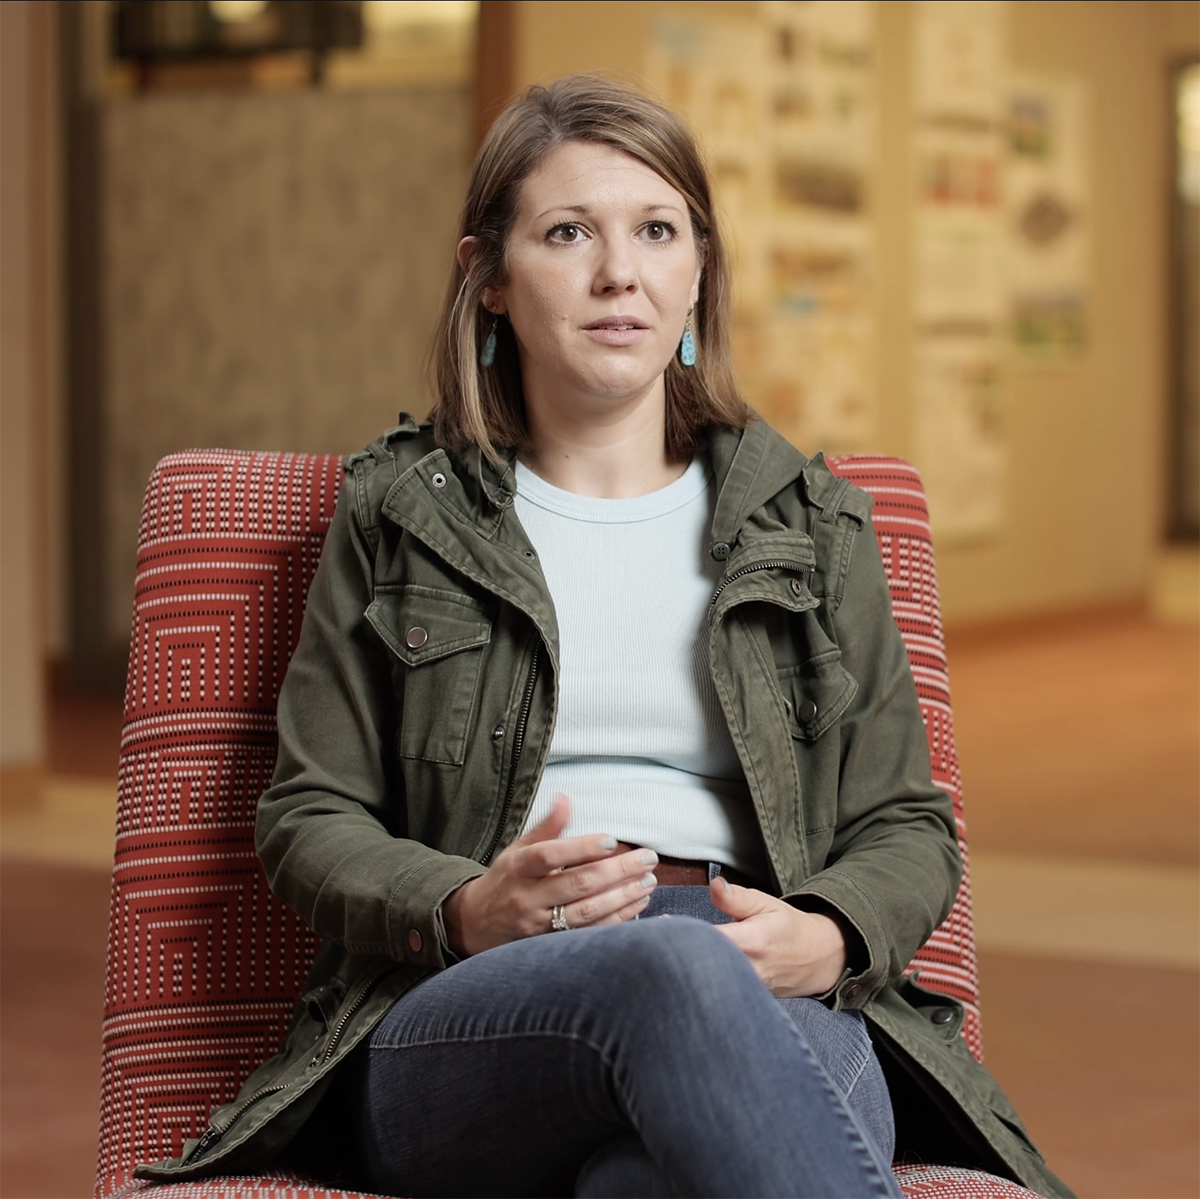 Photo of an alumna seated in a red chair, speaking to a video interviewer